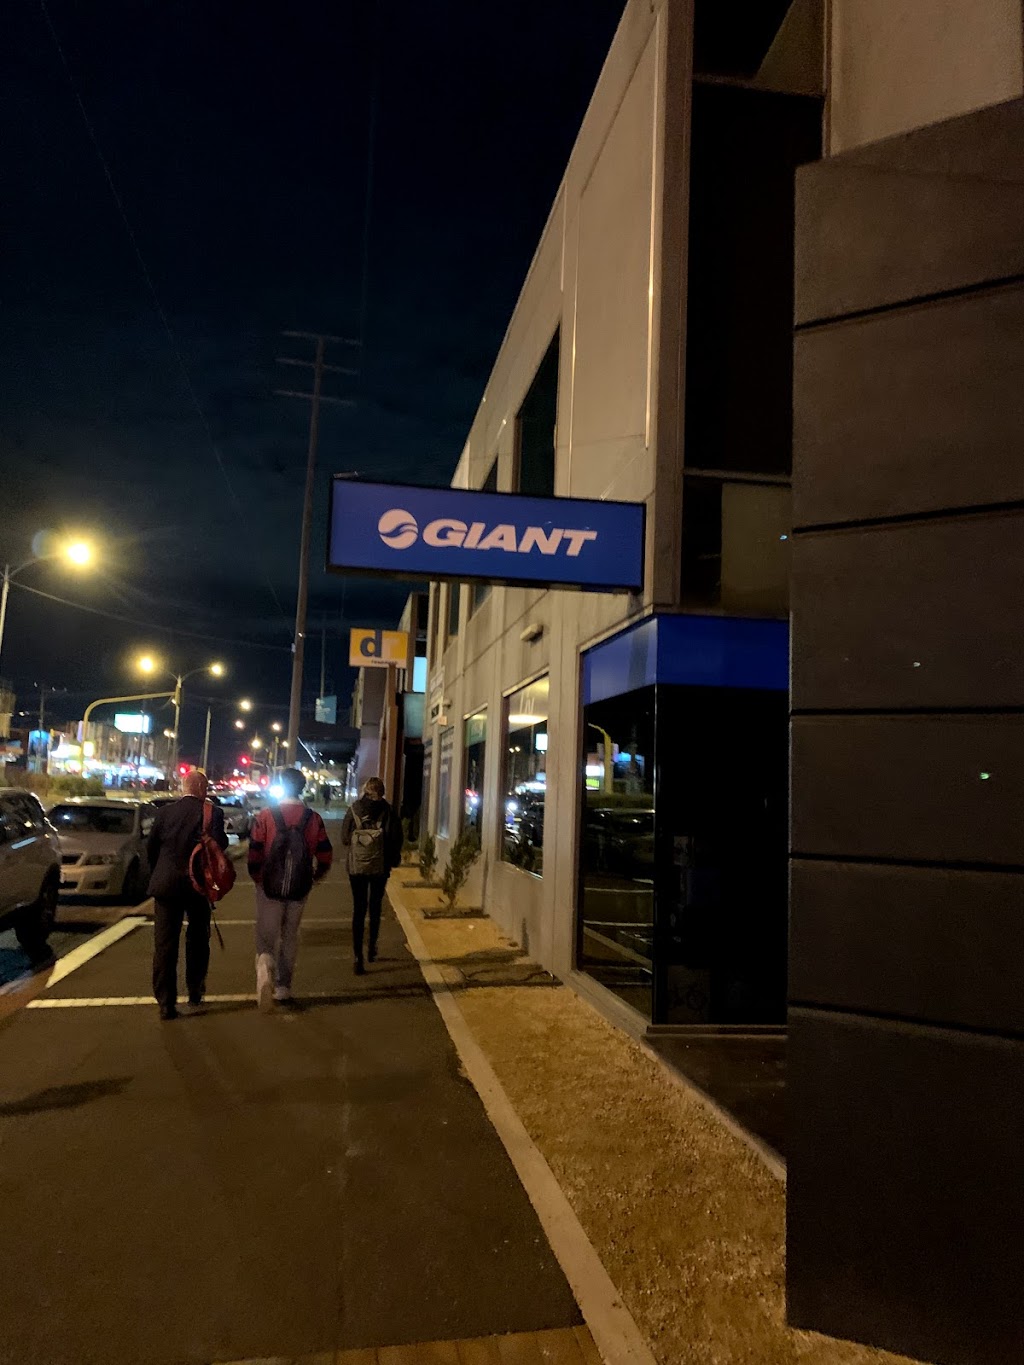 Giant Ormond | bicycle store | 578 North Rd, Ormond VIC 3204, Australia | 0395769212 OR +61 3 9576 9212